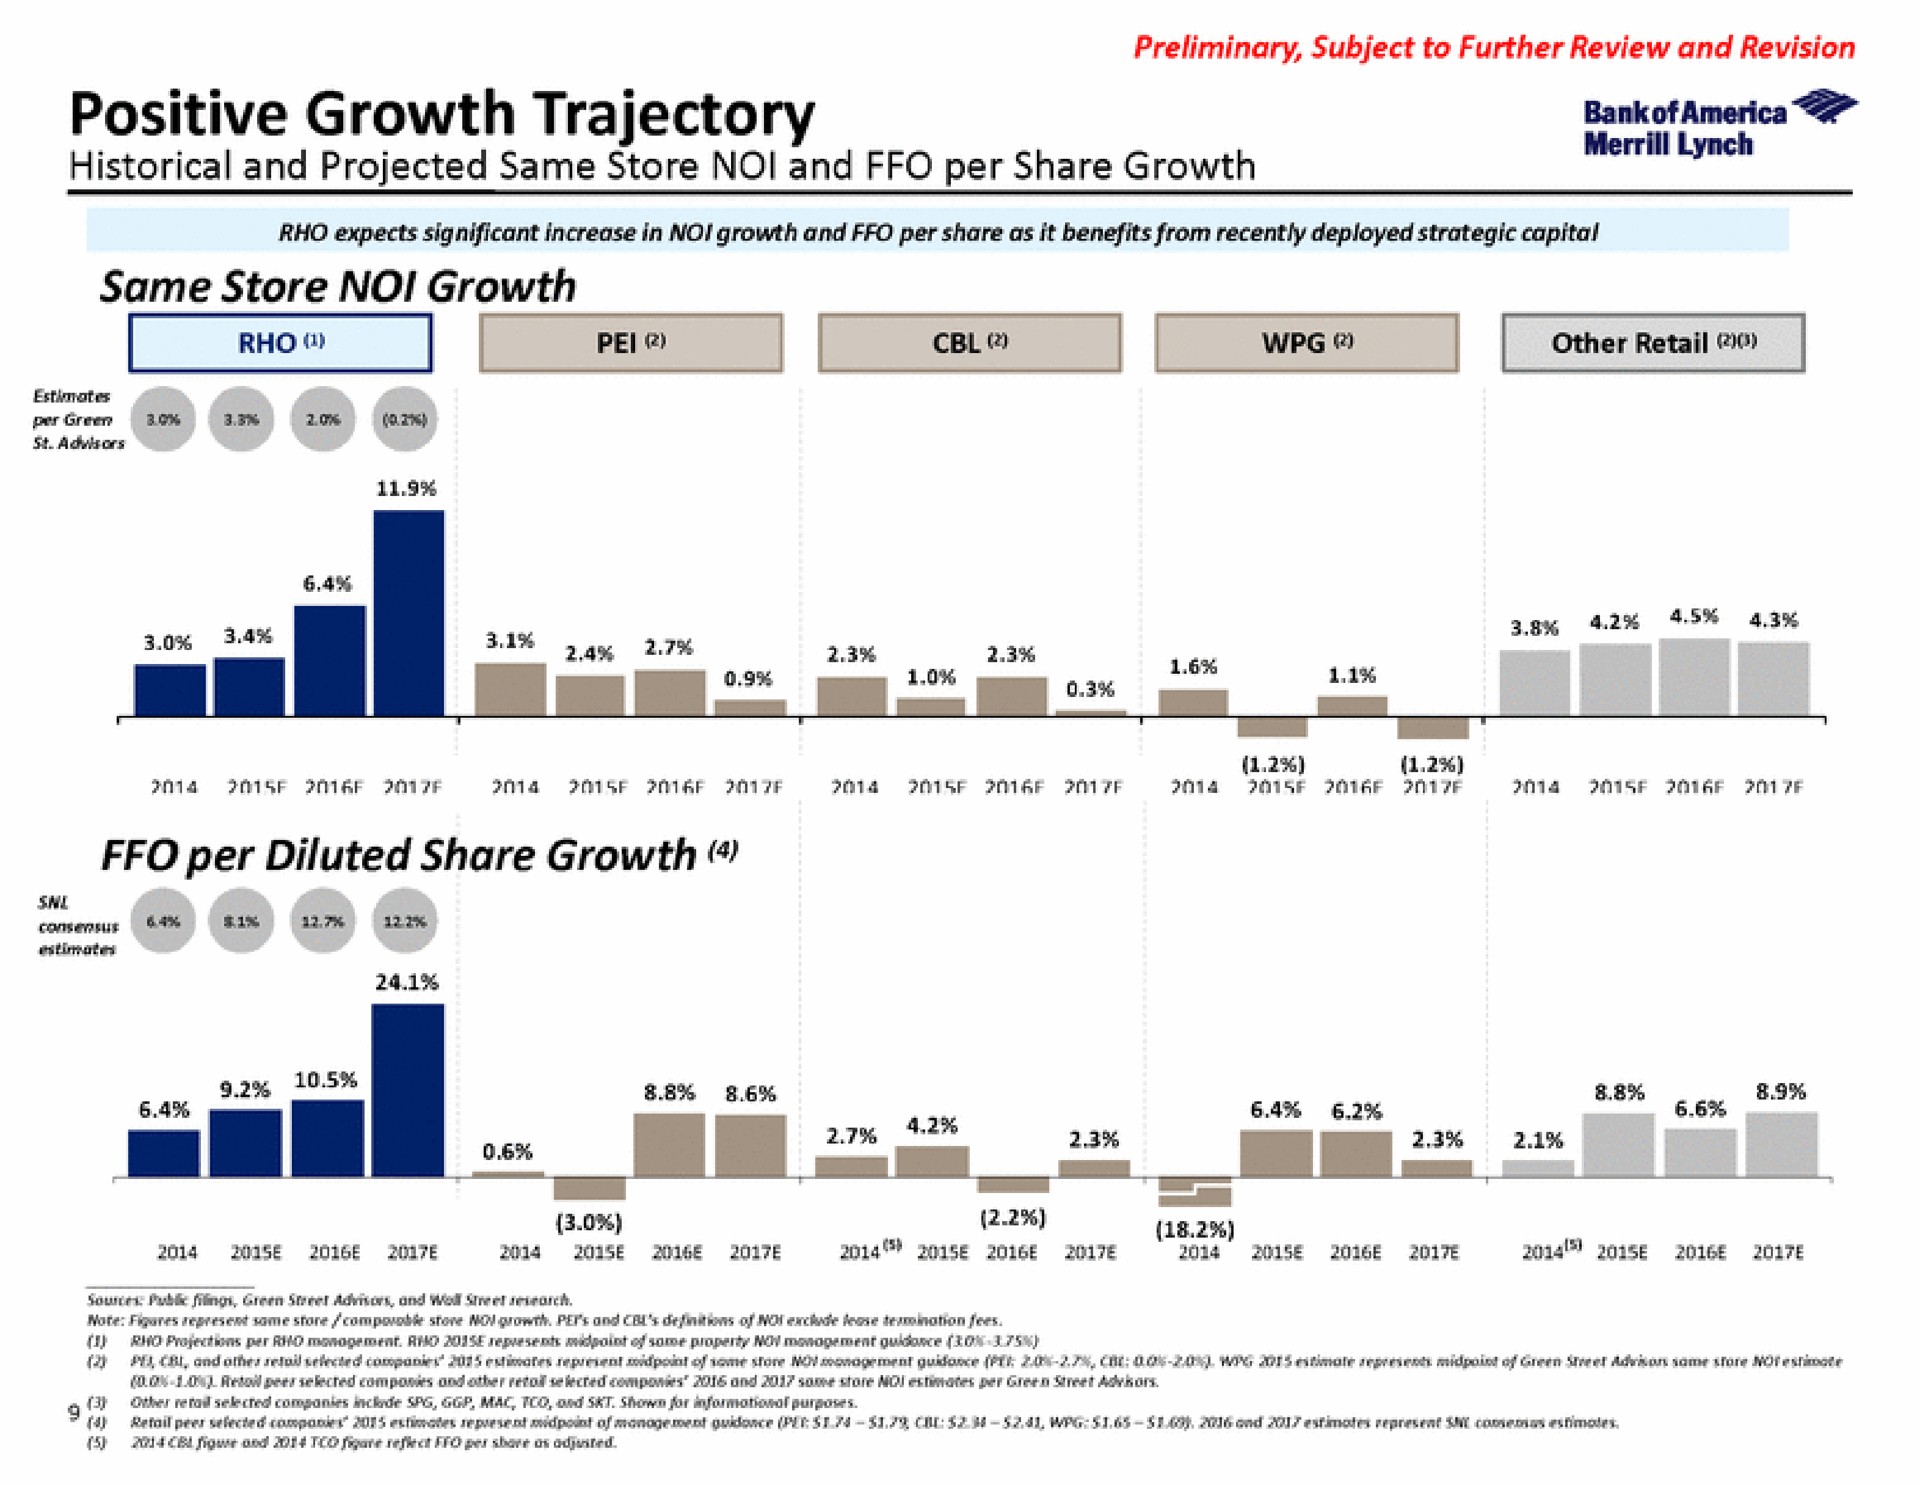 positive growth trajectory historical and projected same store and per share growth same store growth per diluted share growth | Bank of America